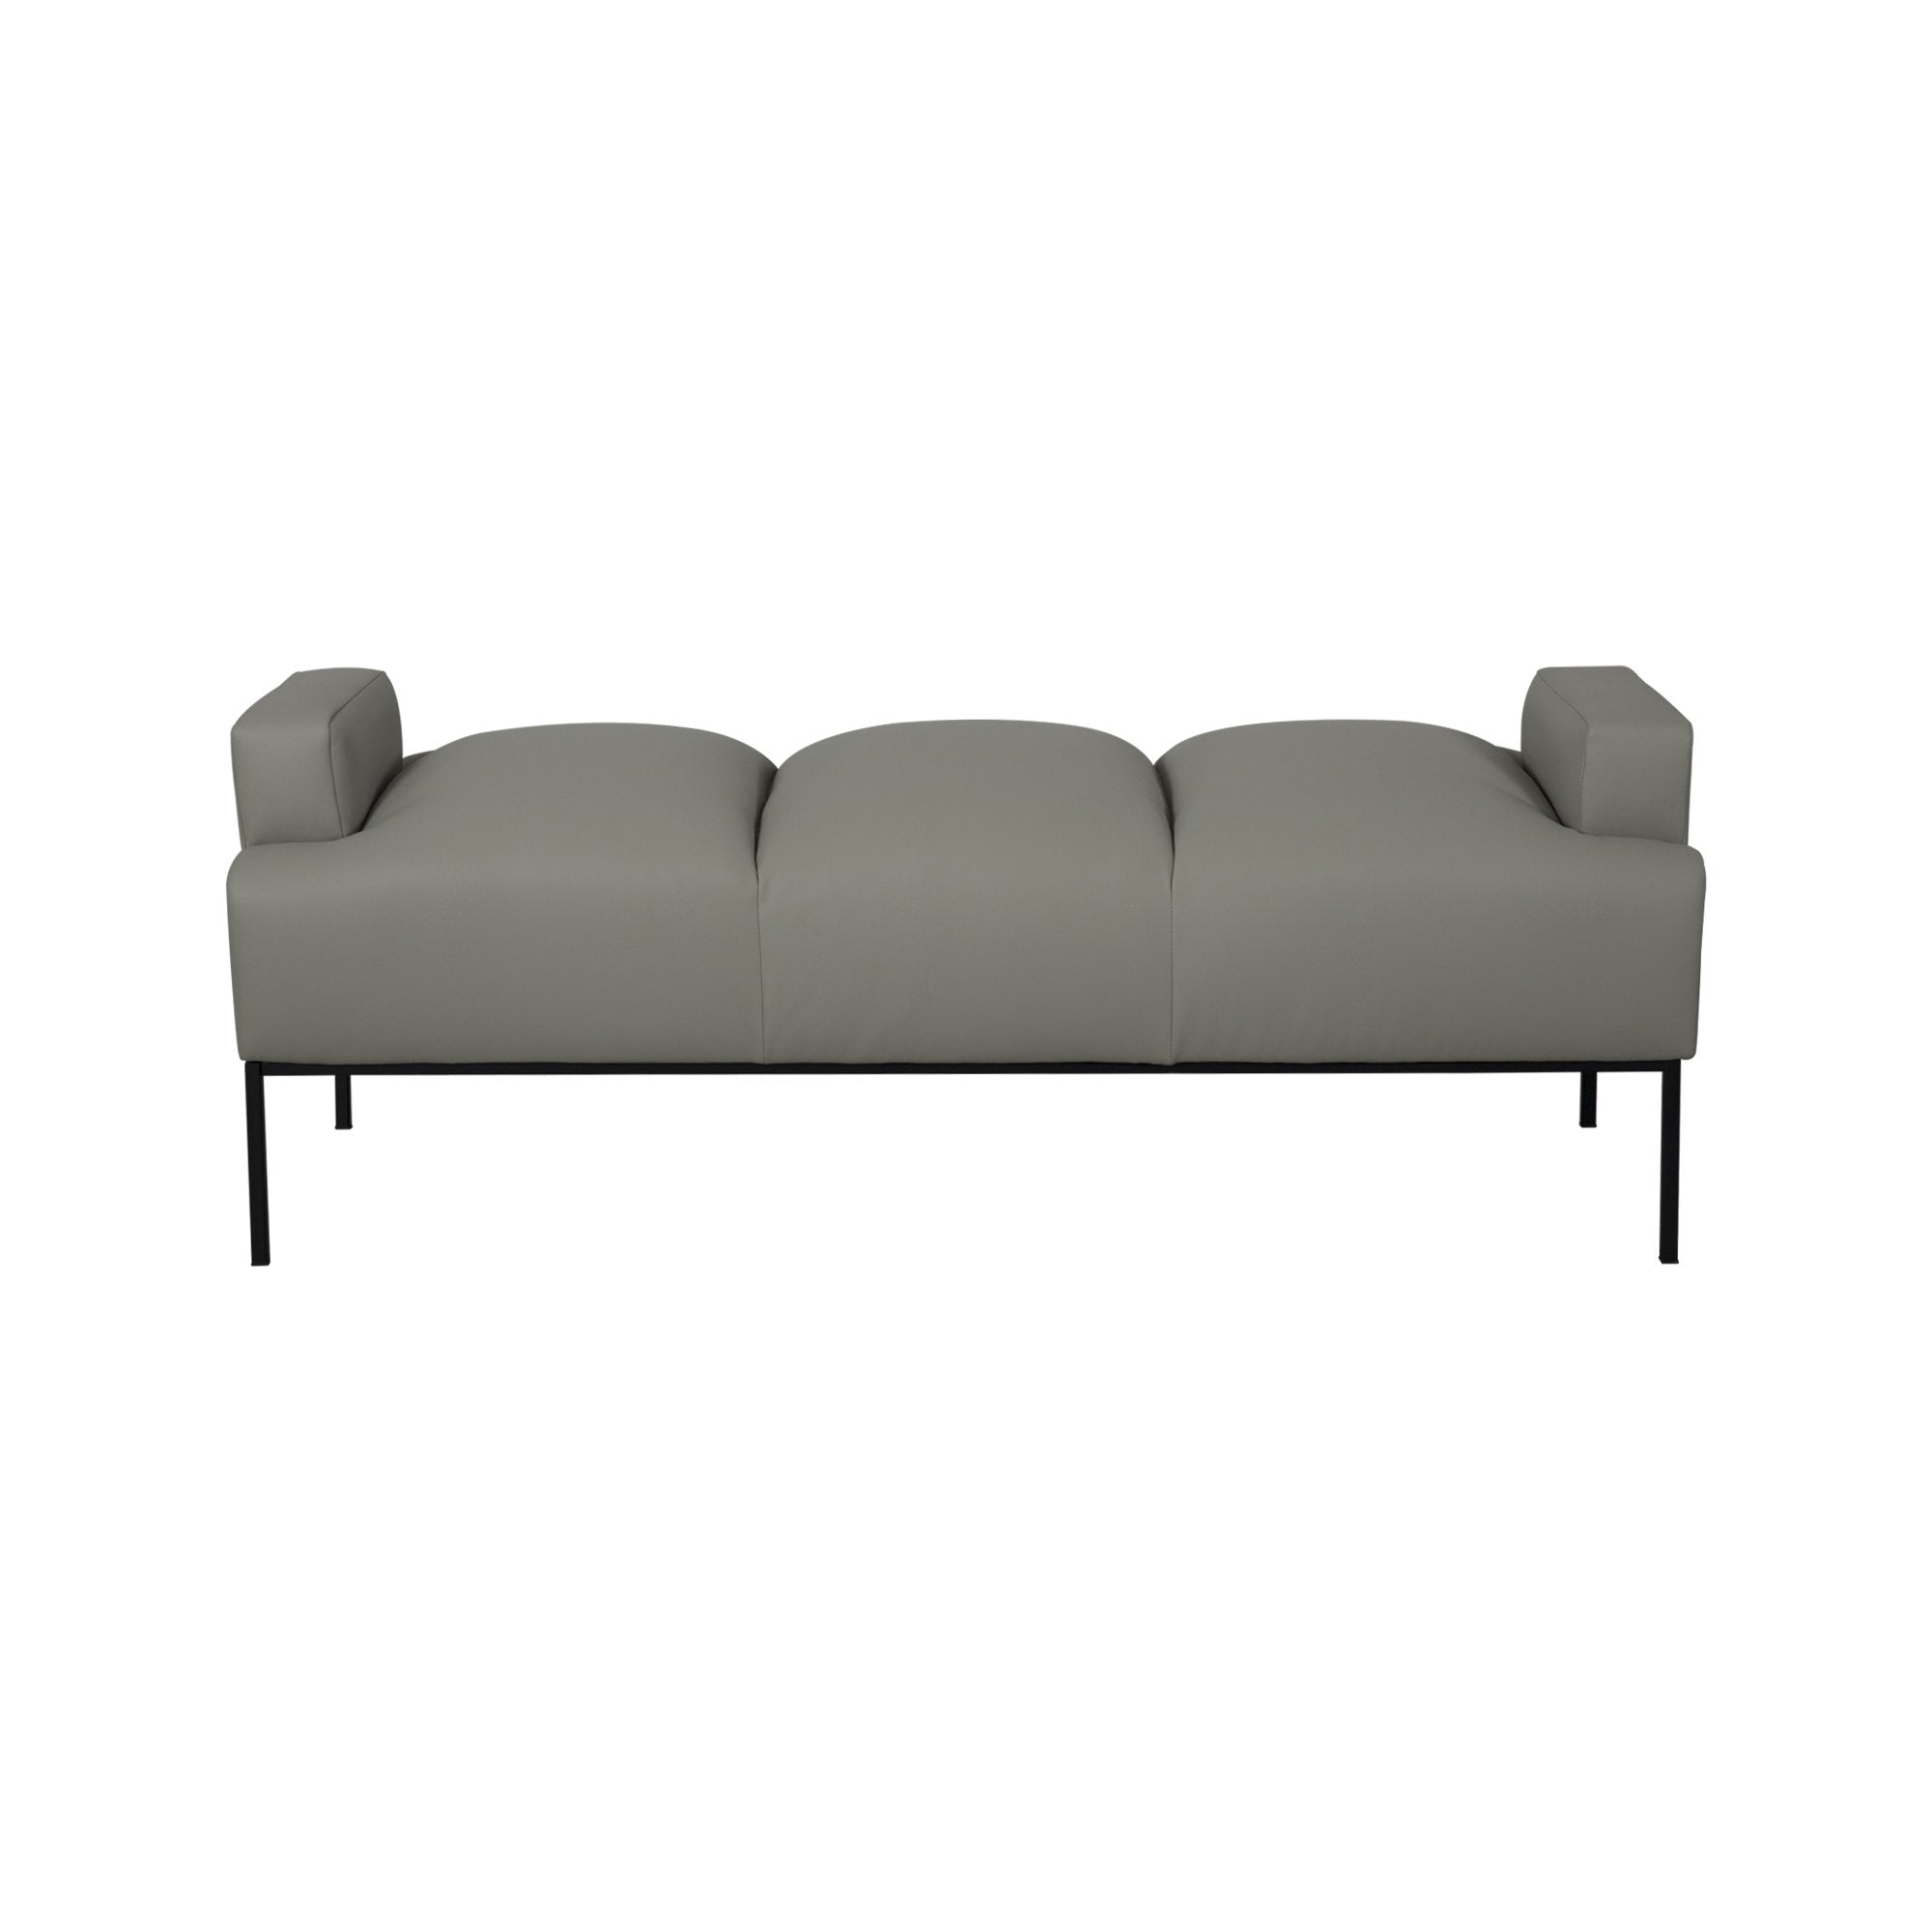 Celicia Faux Leather Bench